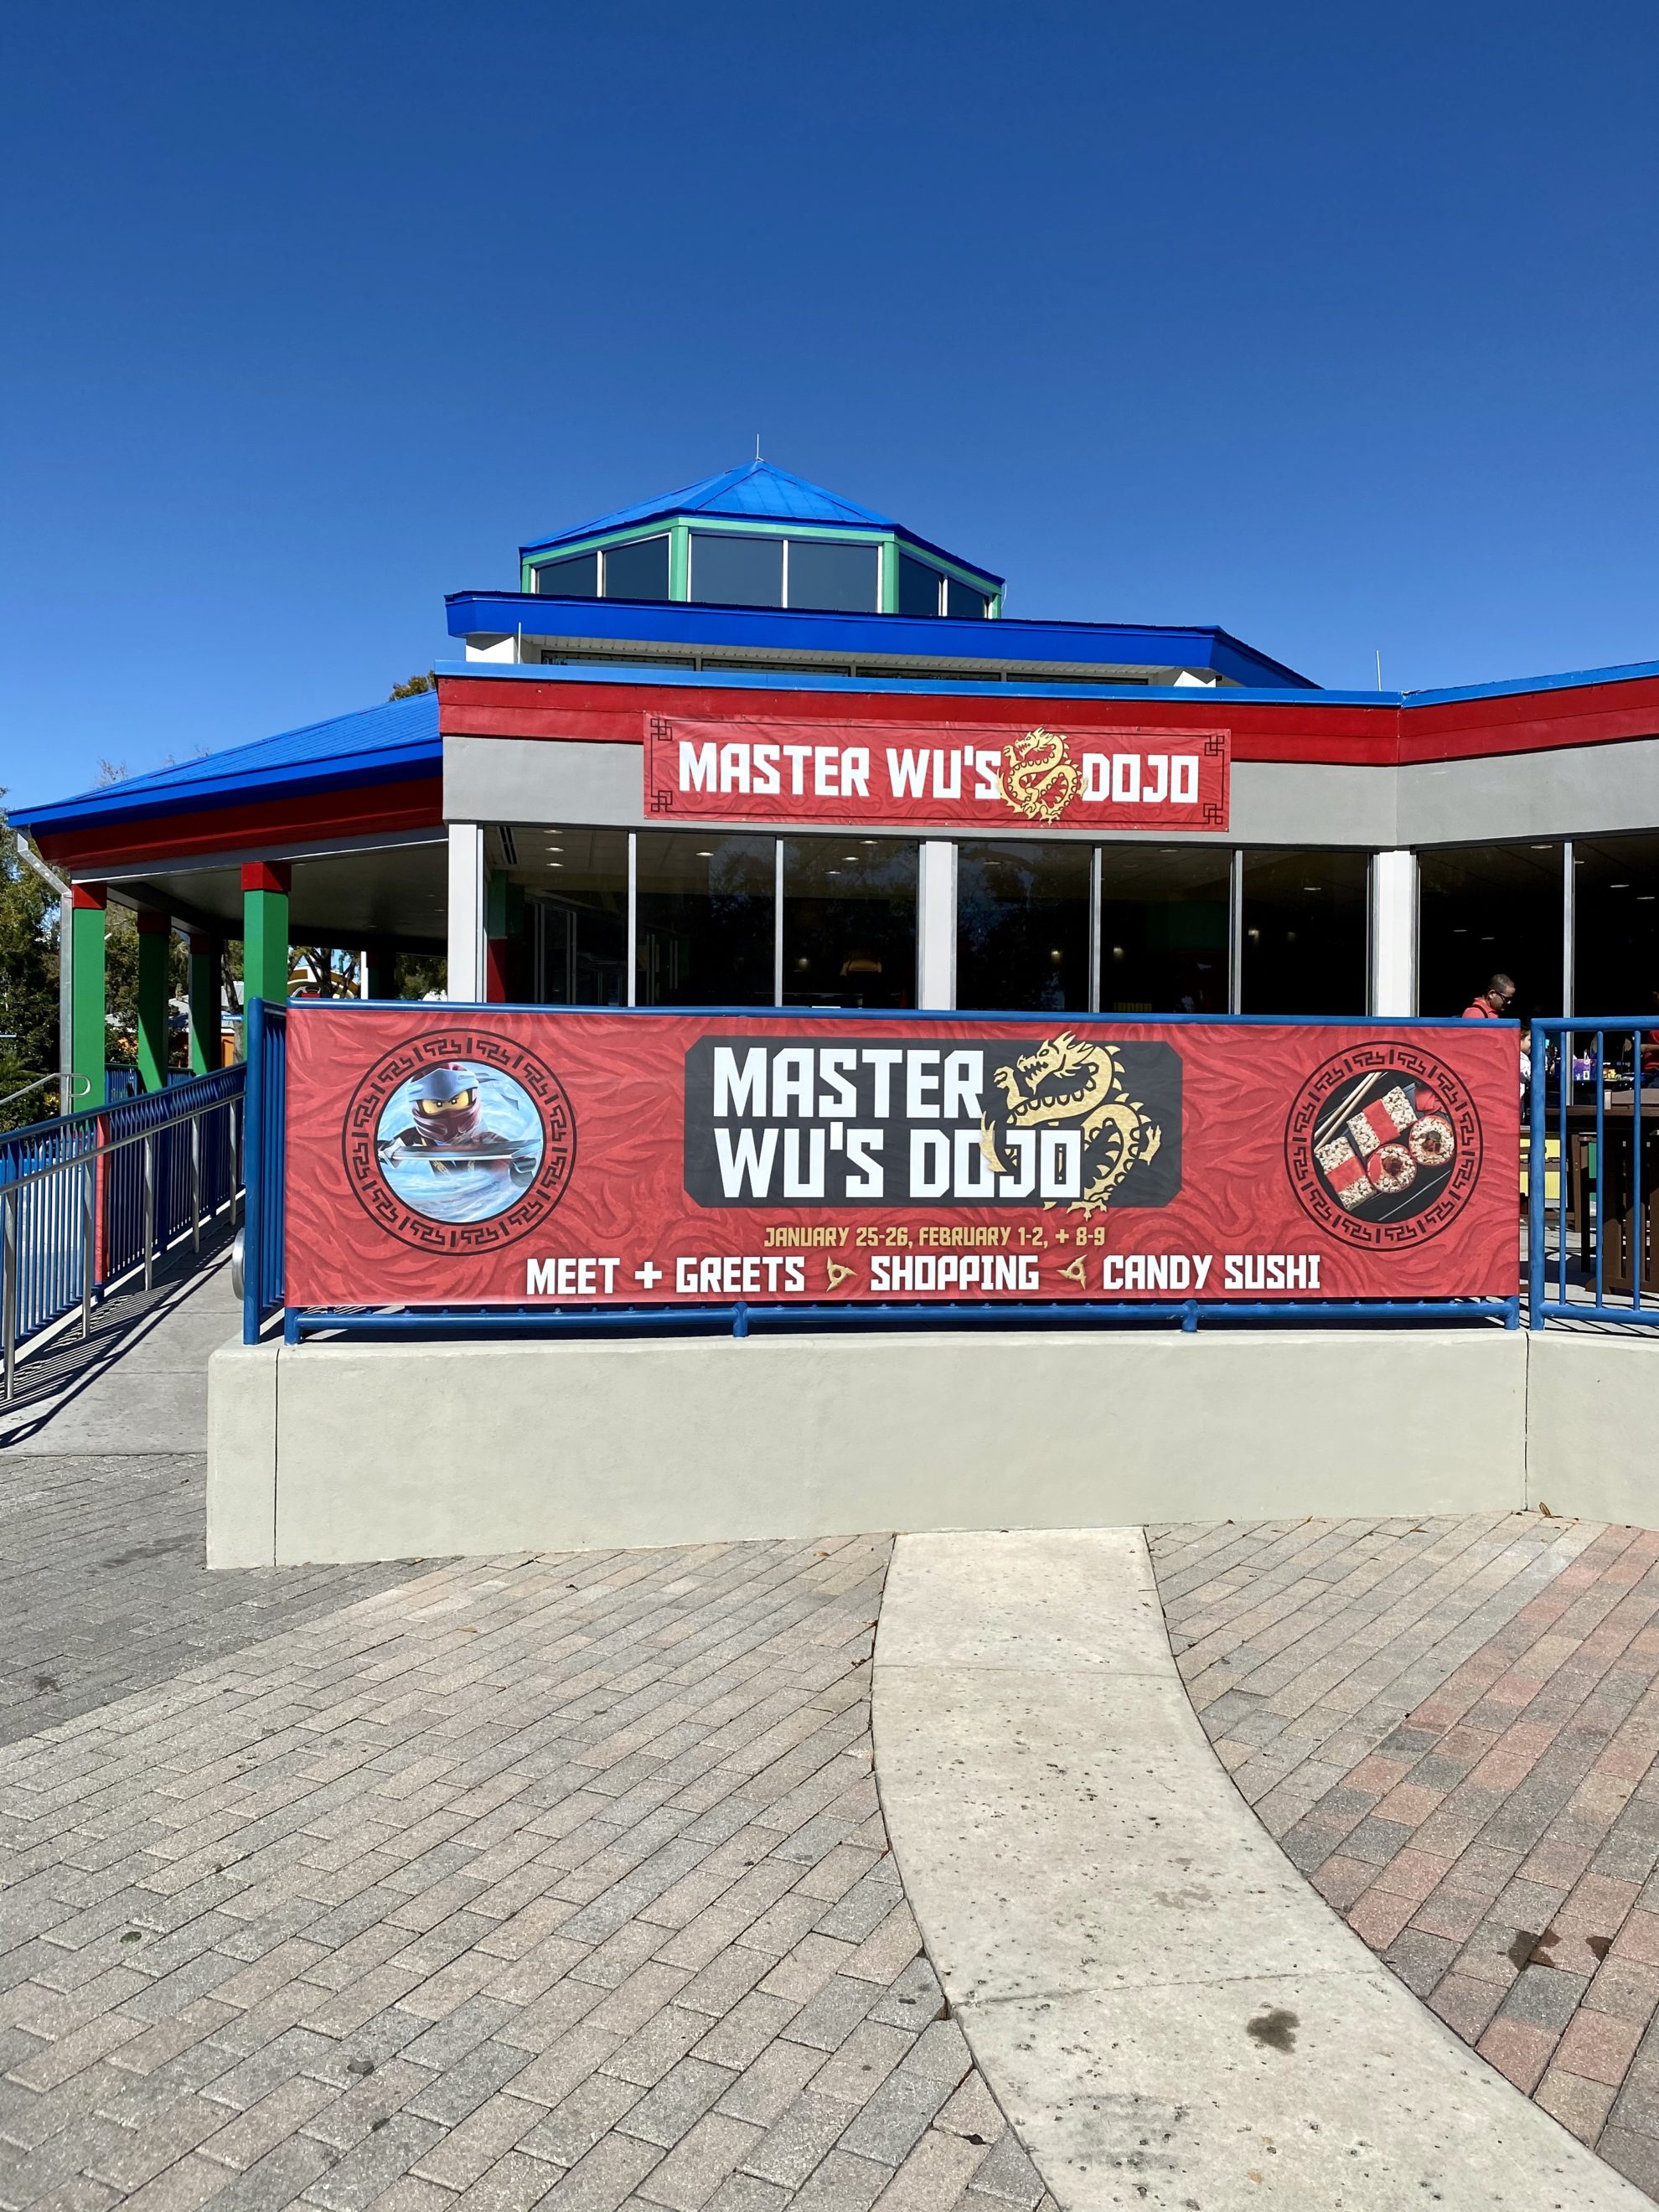 Master Wu's Dojo building with shopping, food, and meet and greets.